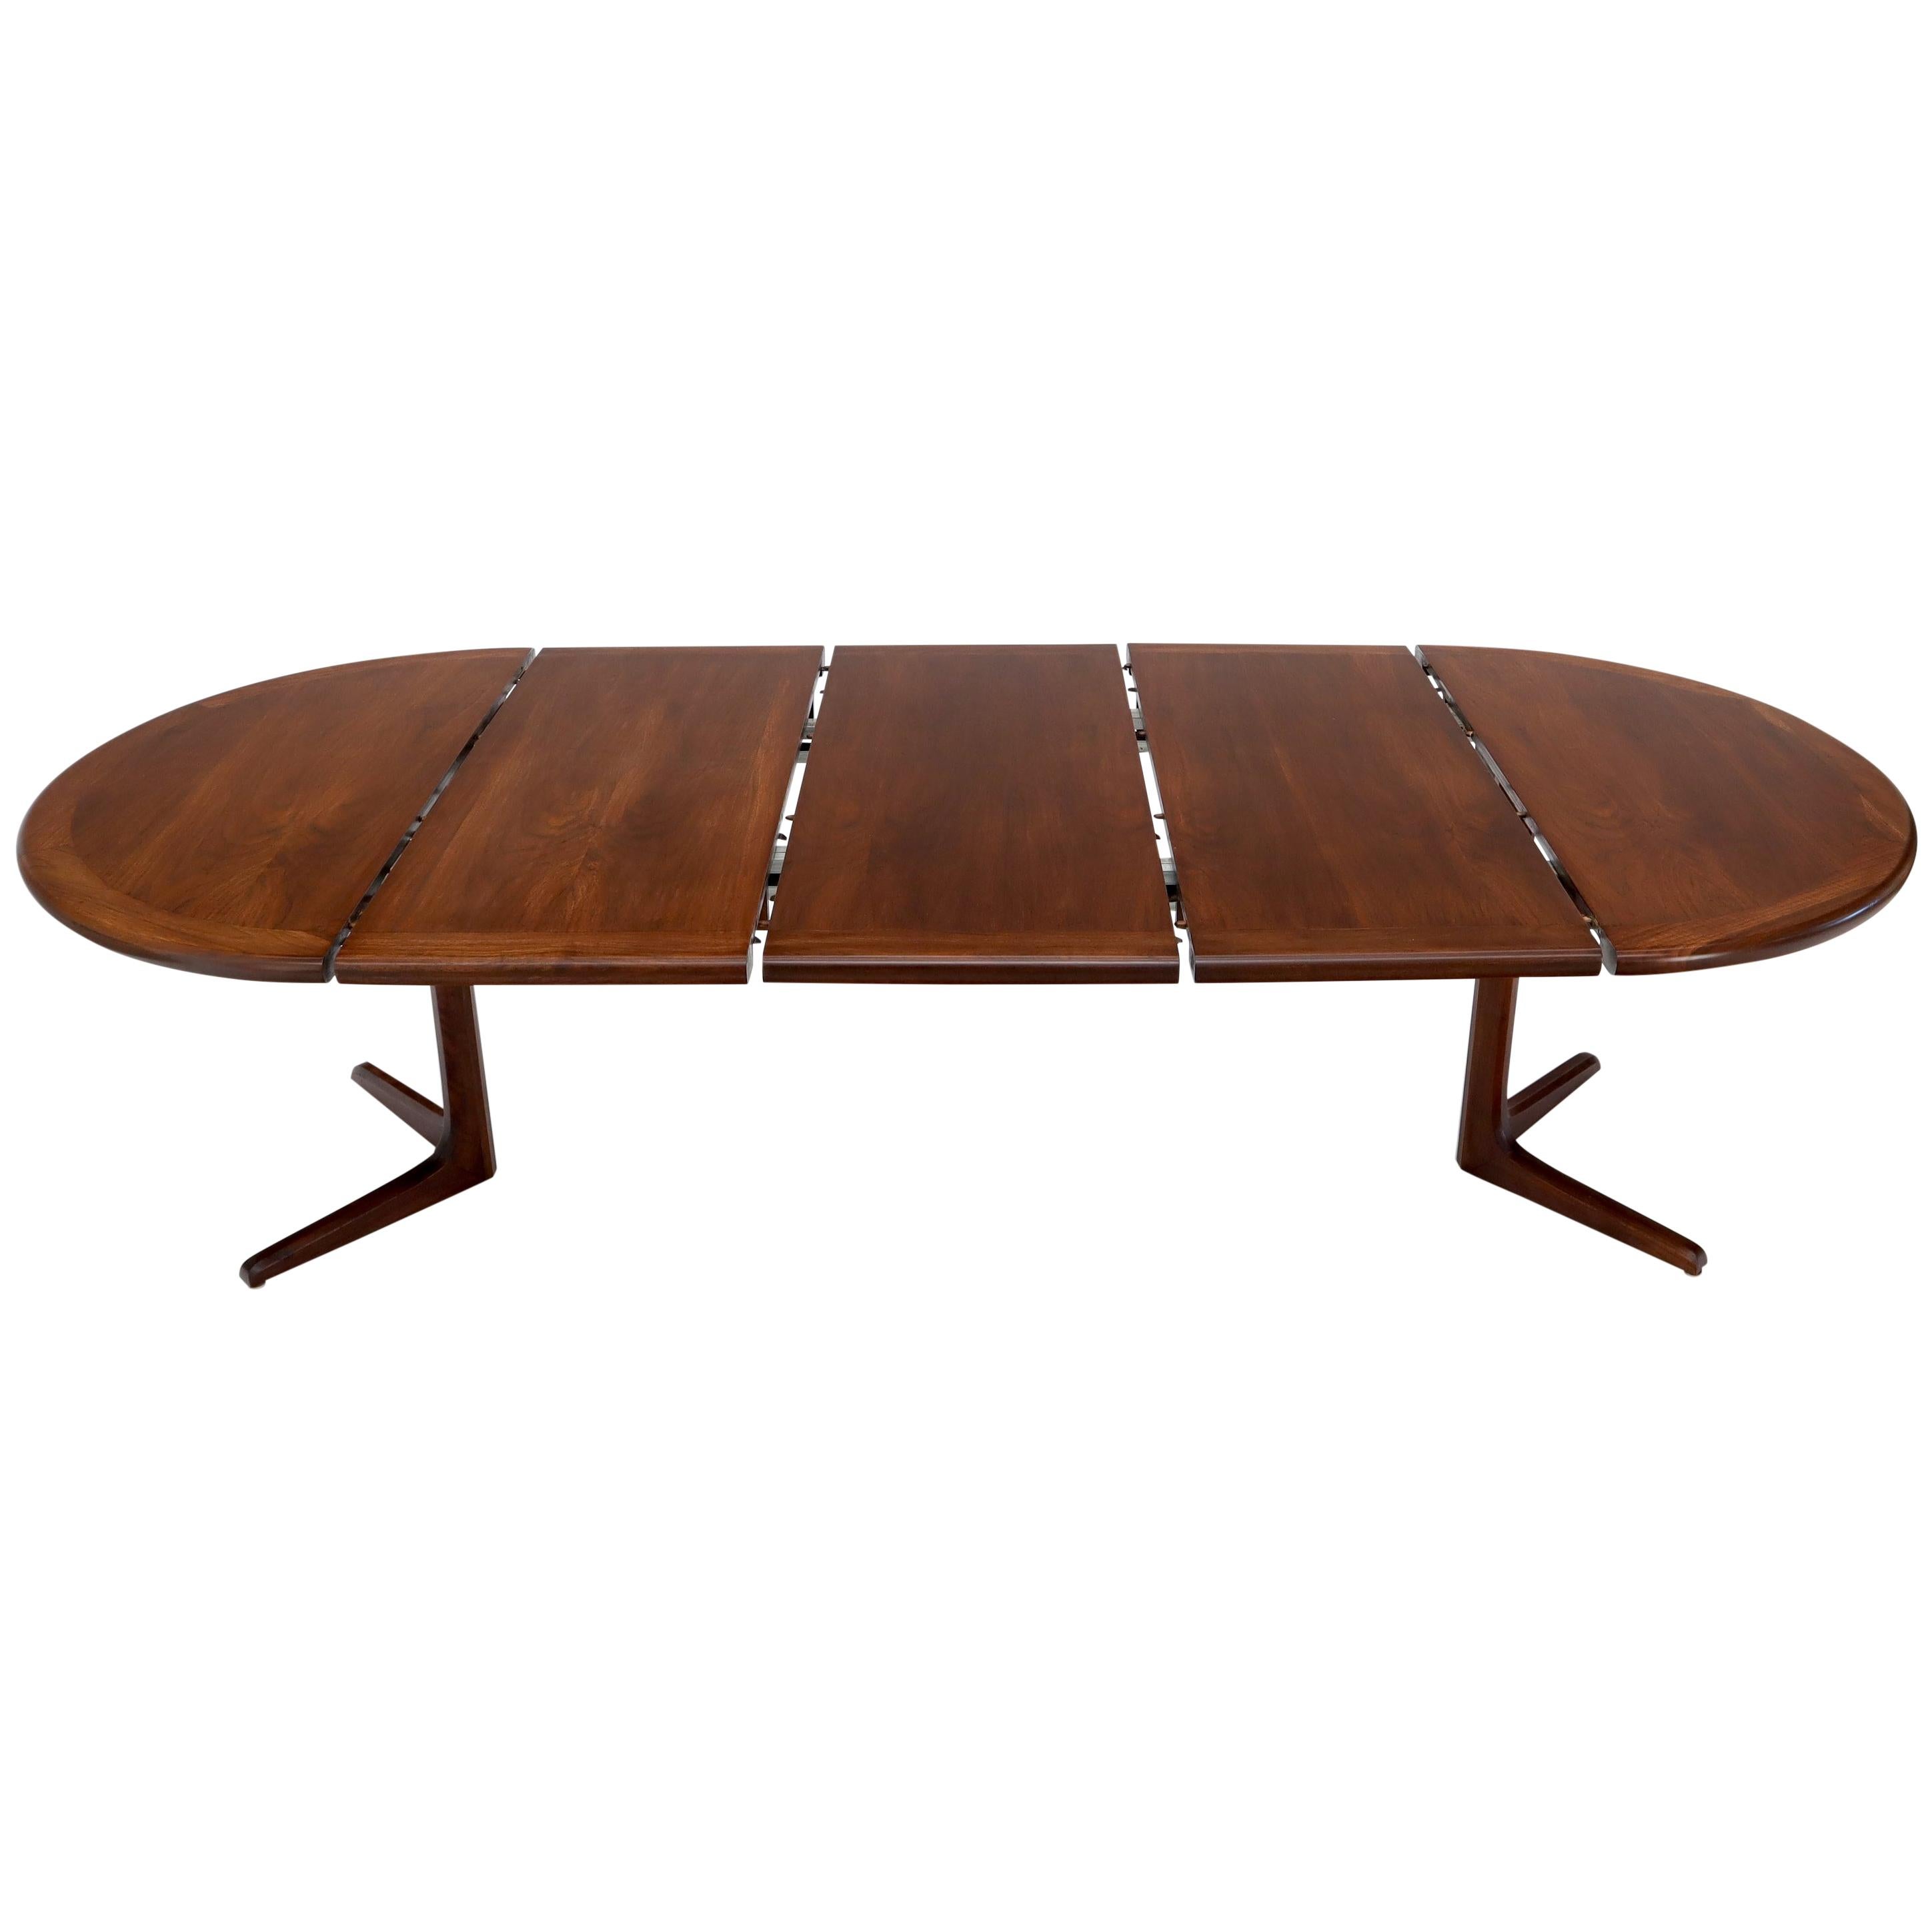 Walnut Danish Mid-Century Modern Round Dining Table, 3 Extension Leaves Boards